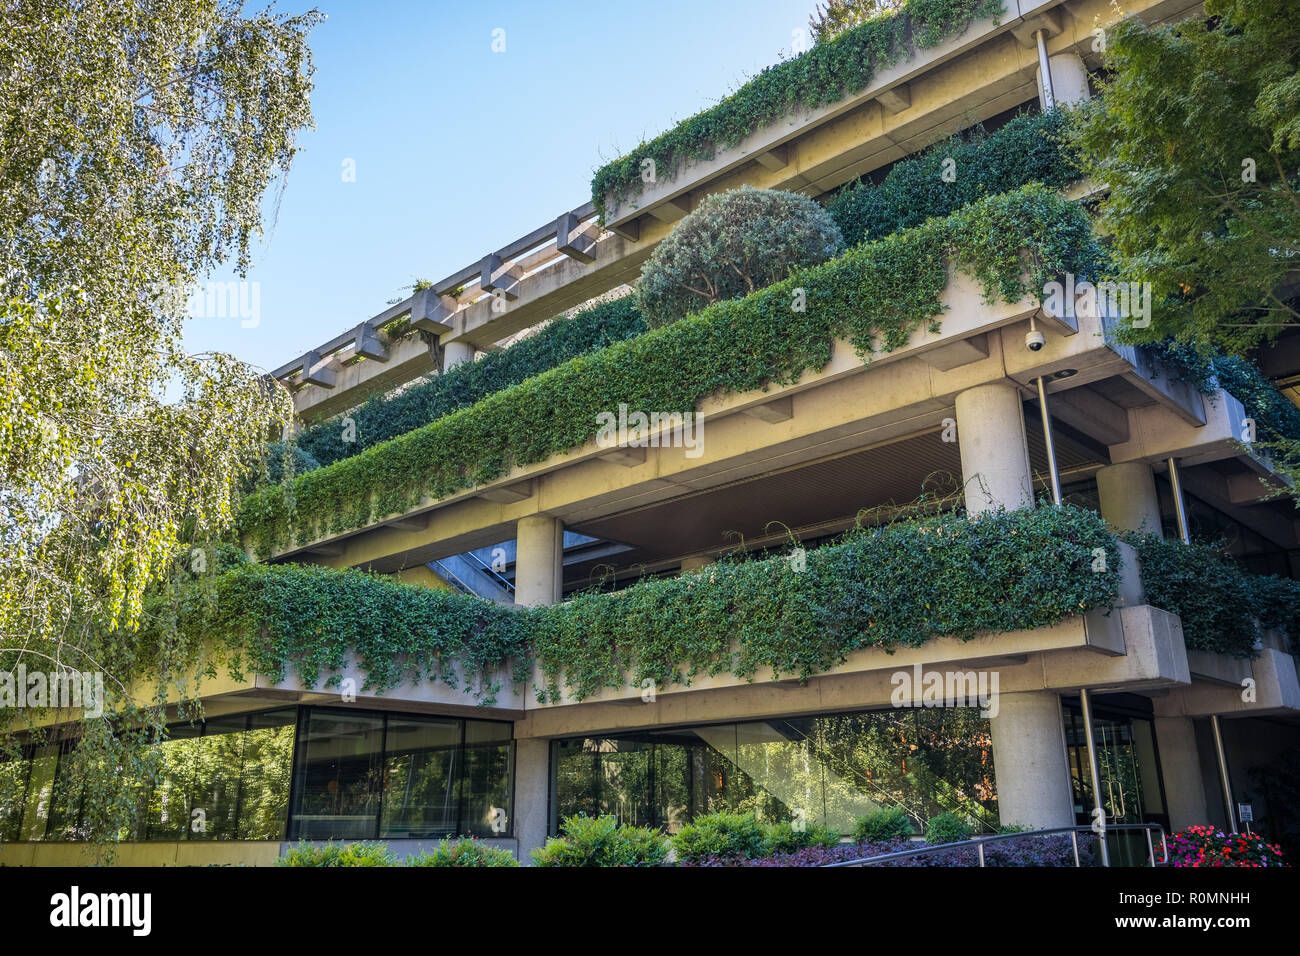 Building covered in green vines and surrounded by trees close to downtown Sacramento, California Stock Photo